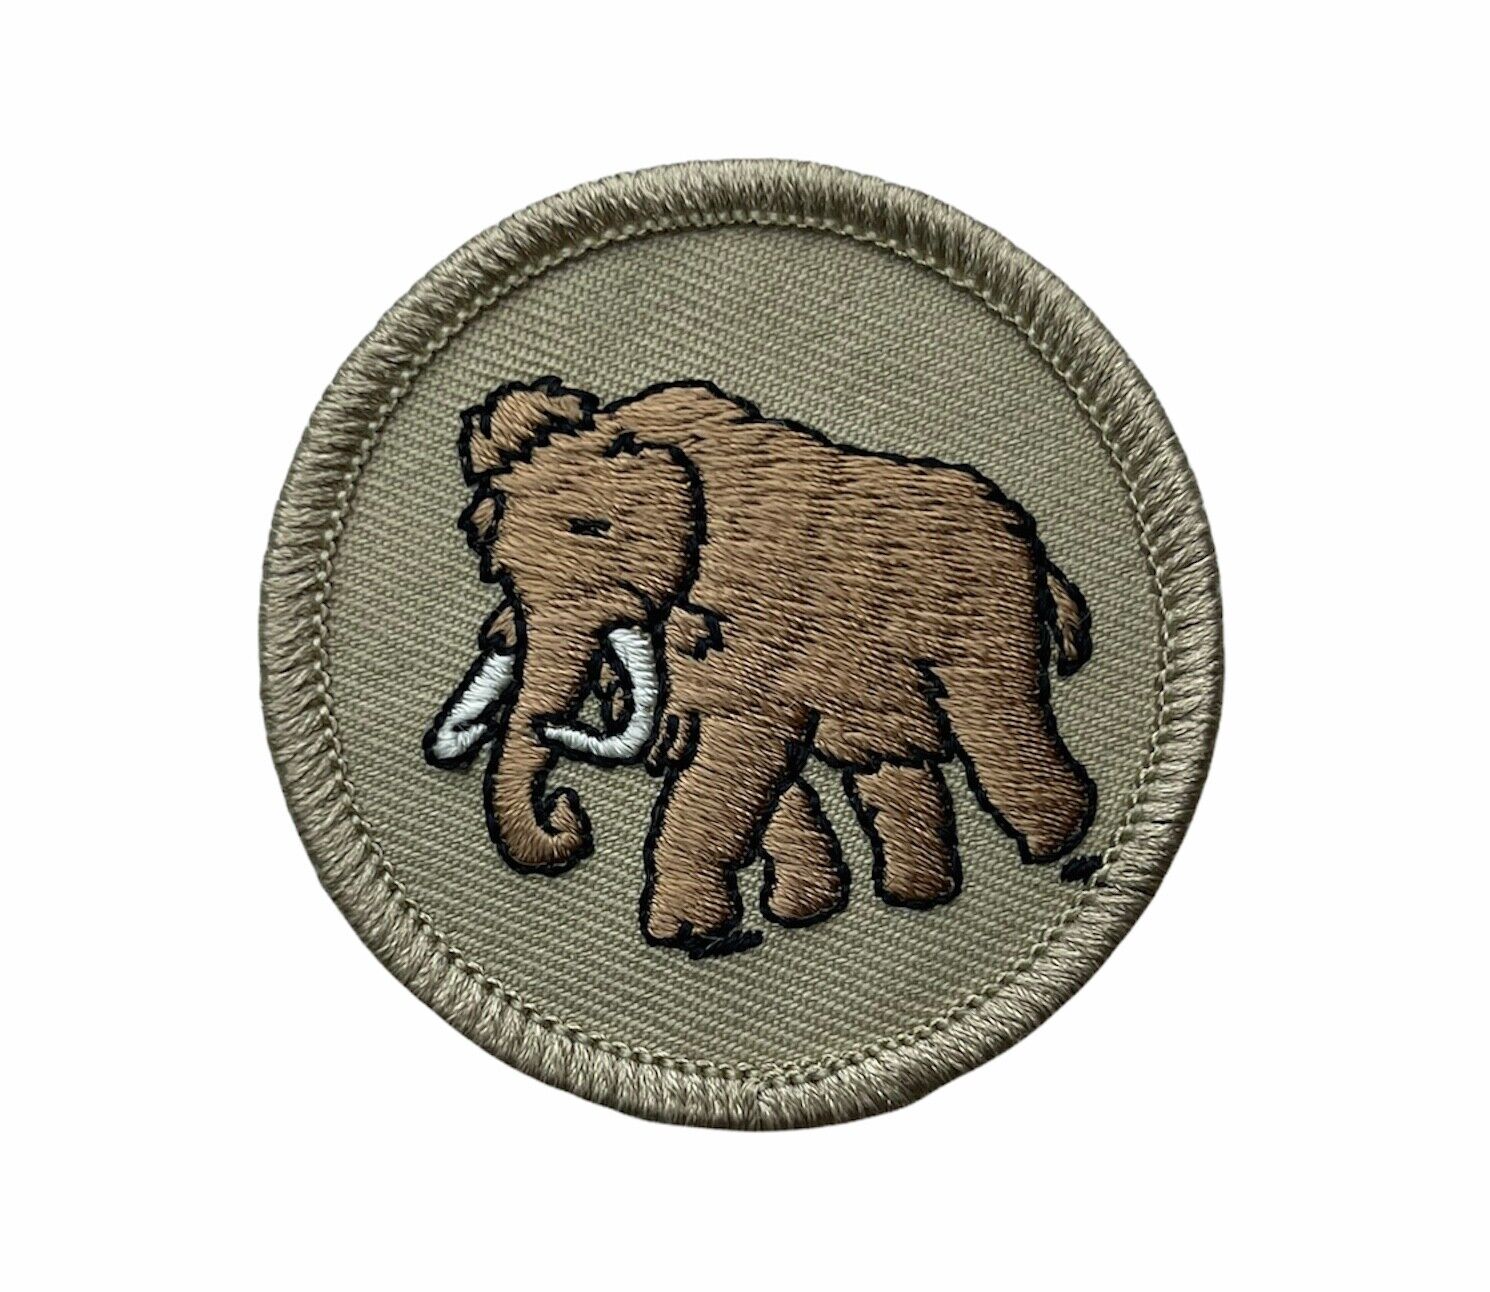 BSA Licensed Wooly Mammoth Boy Scouts Badge Boys 2 inch Patch AVAQ0278 F6D28S